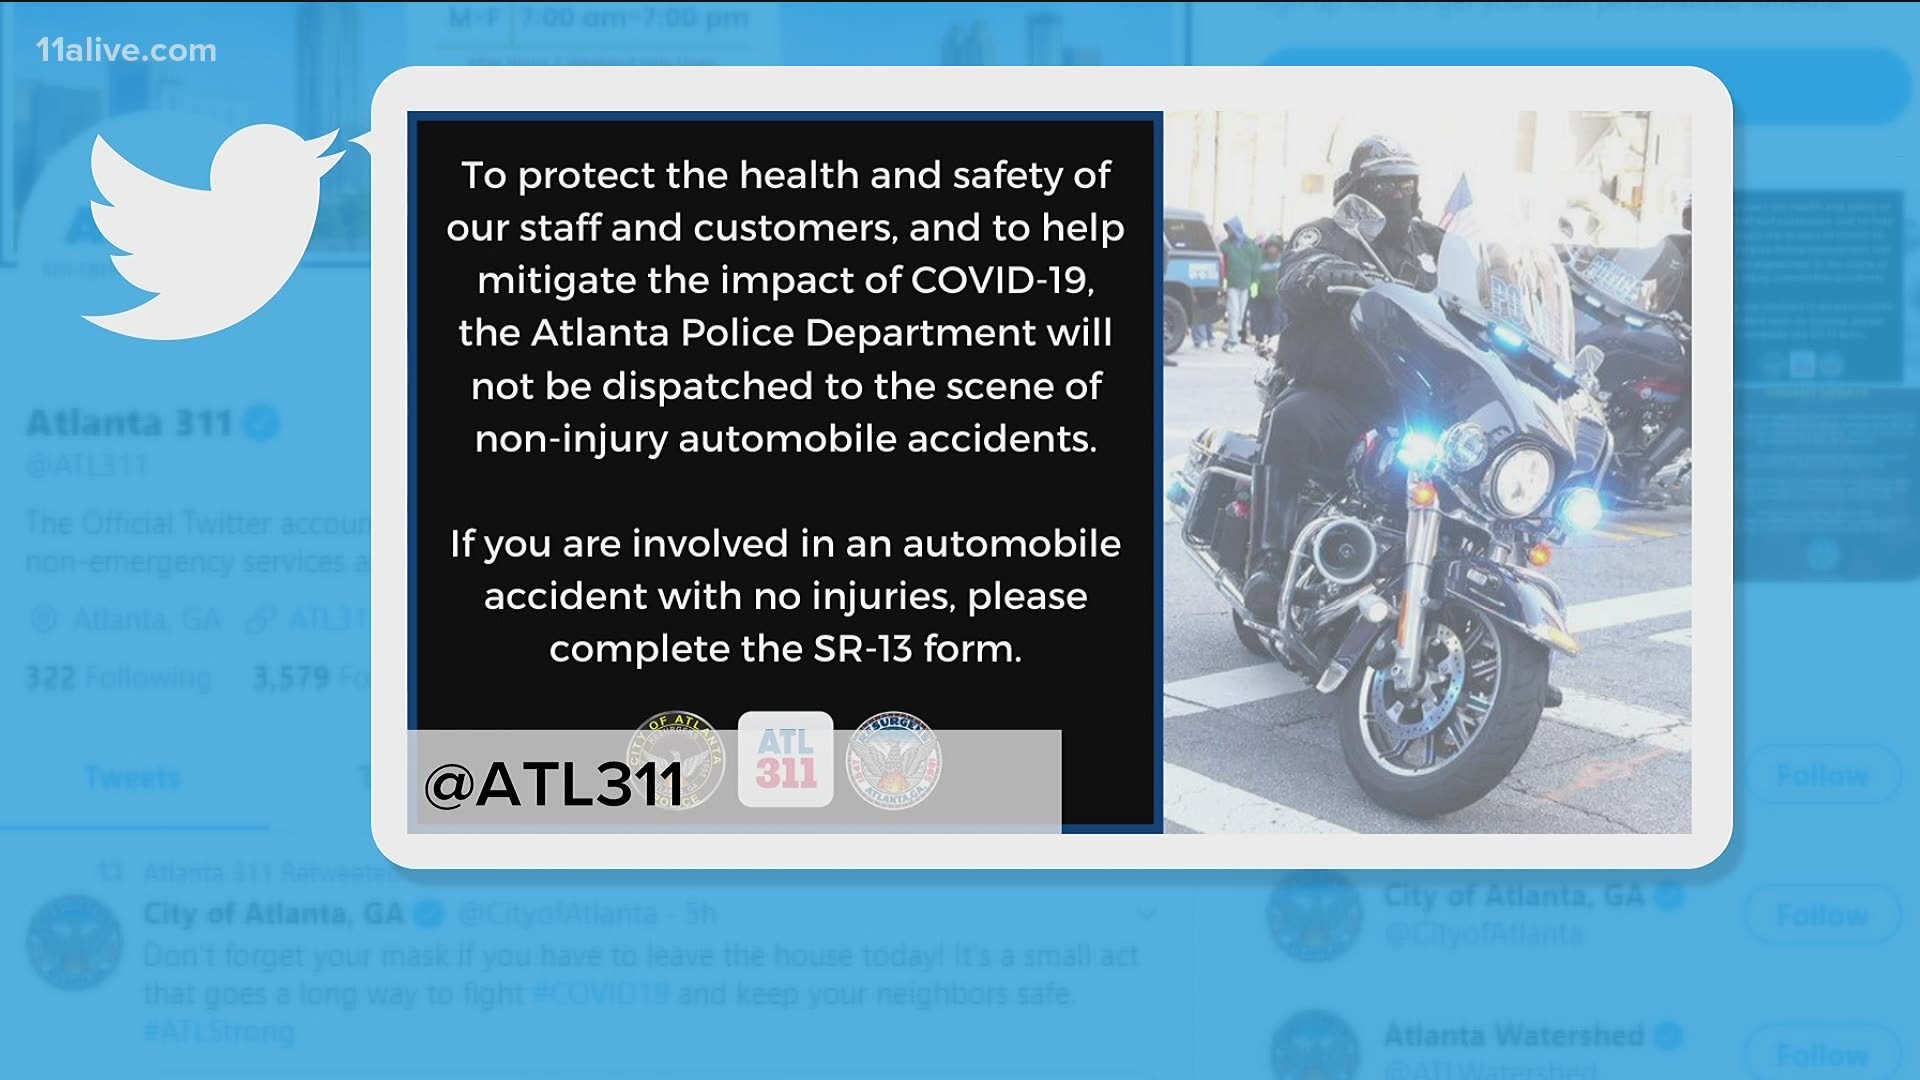 The Atlanta Police Department has suspended the response to non-injury crashes as a result of following social distancing guidelines due to COVID-19.